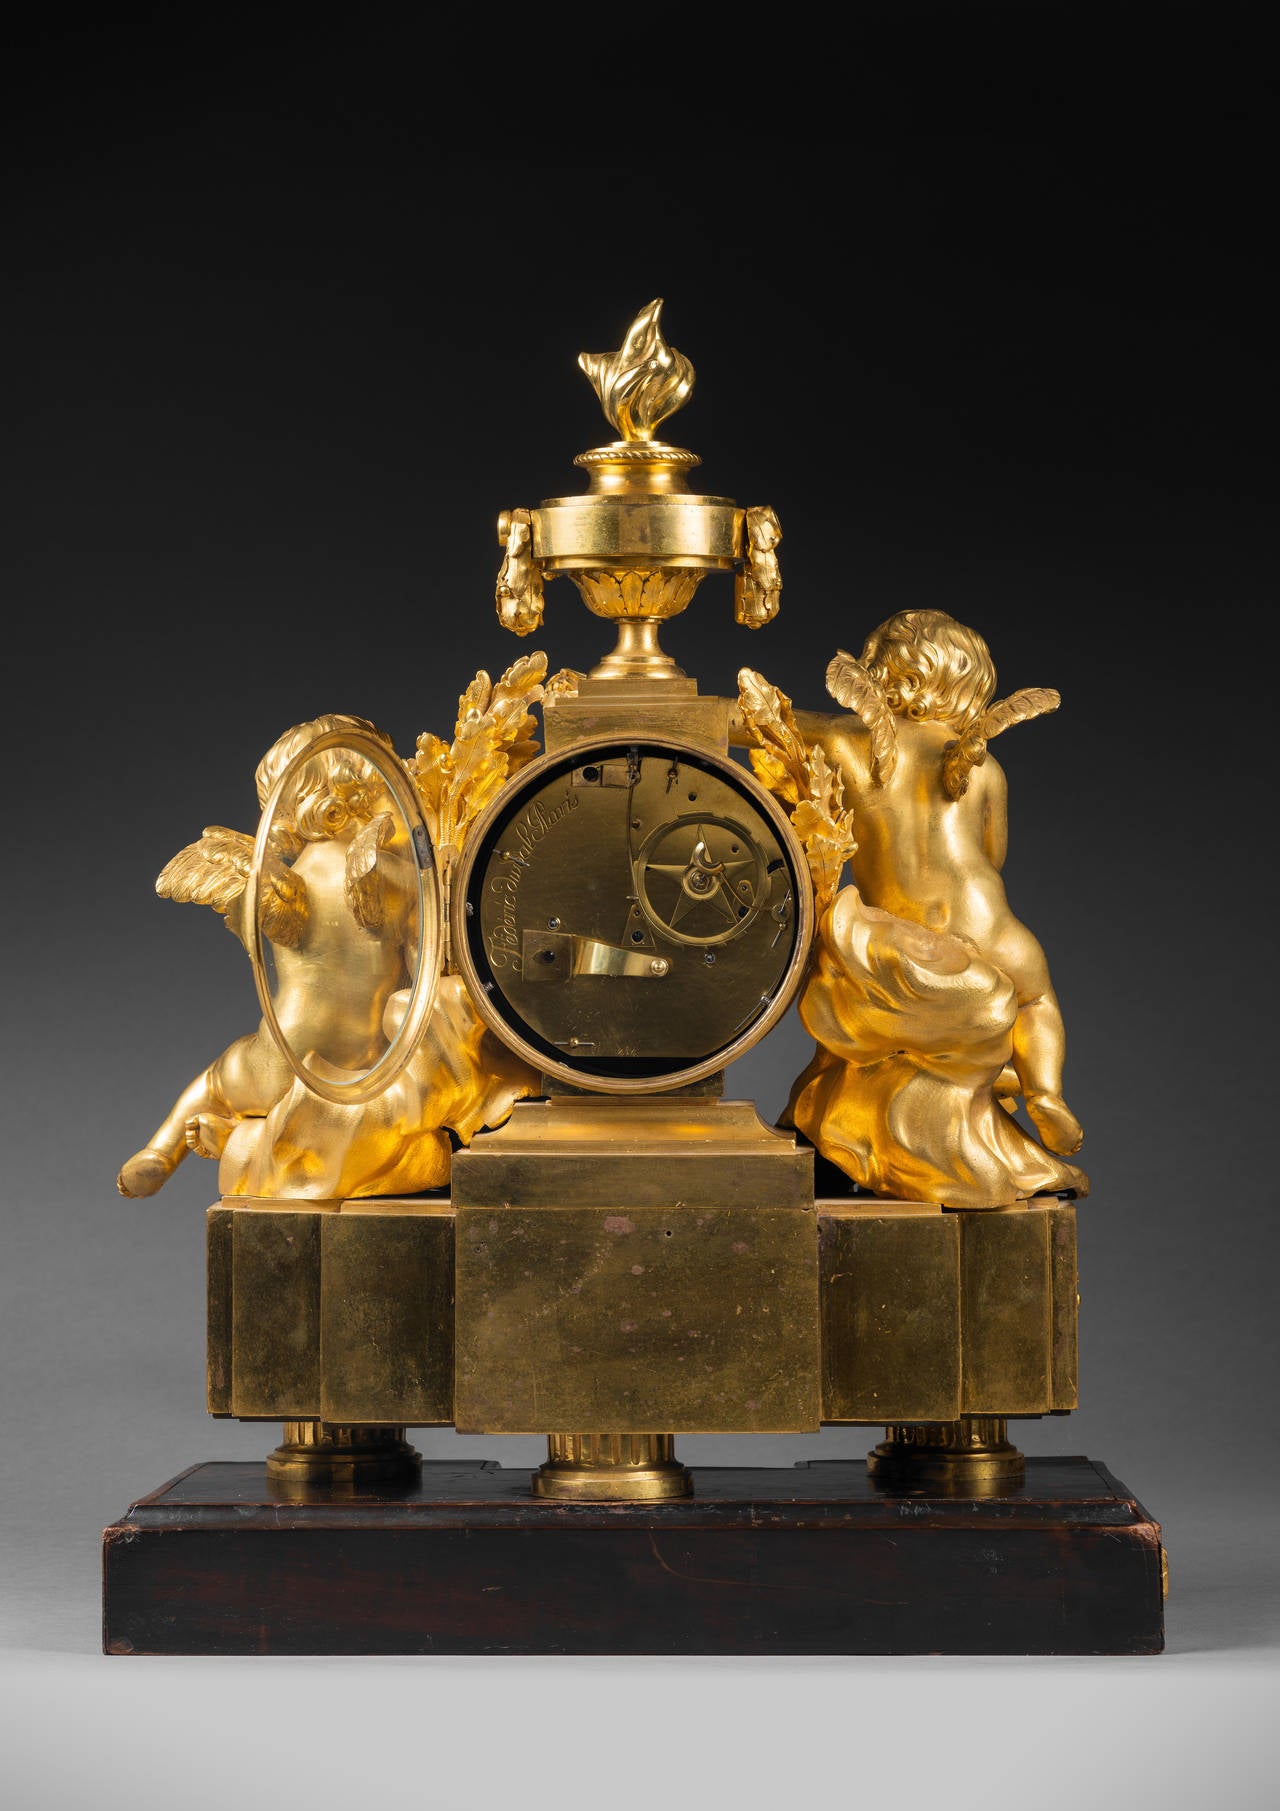 Late 18th Century Gilt Bronze Louis XVI Clock by Duval, Case Attributed to Saint-Germain